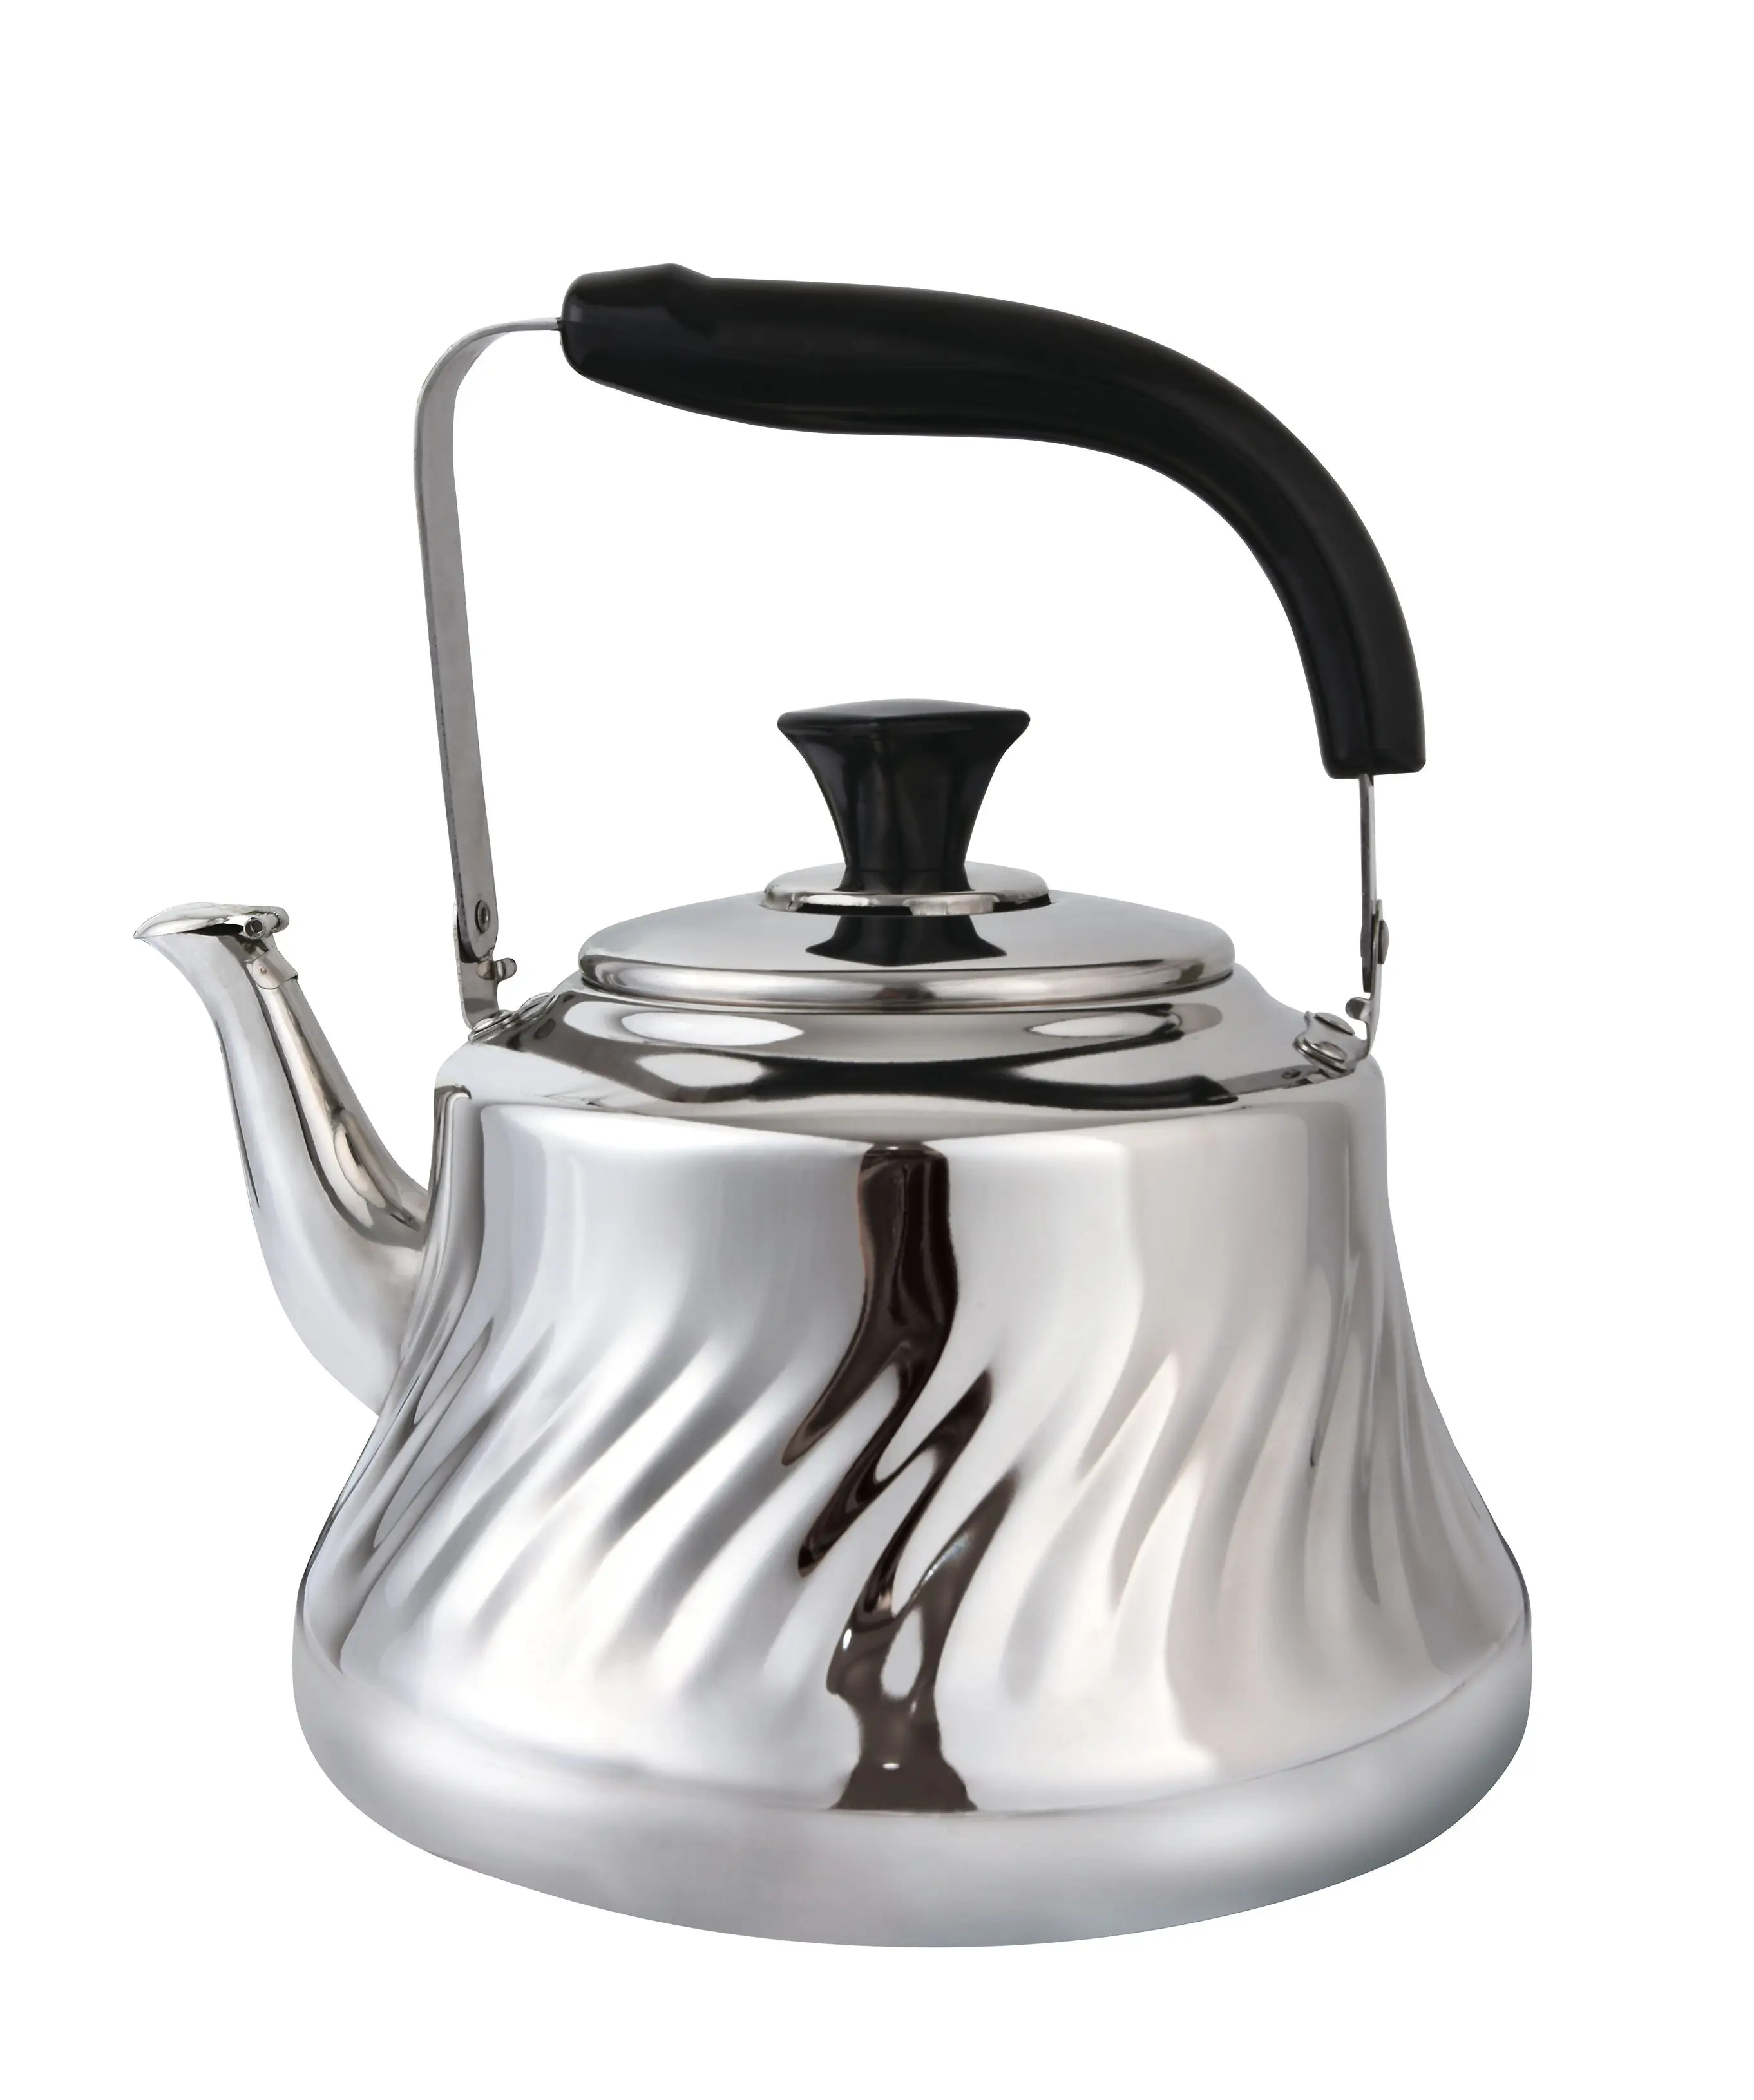 Durable Japanese style teapot with infuser of japanese teapot for home use